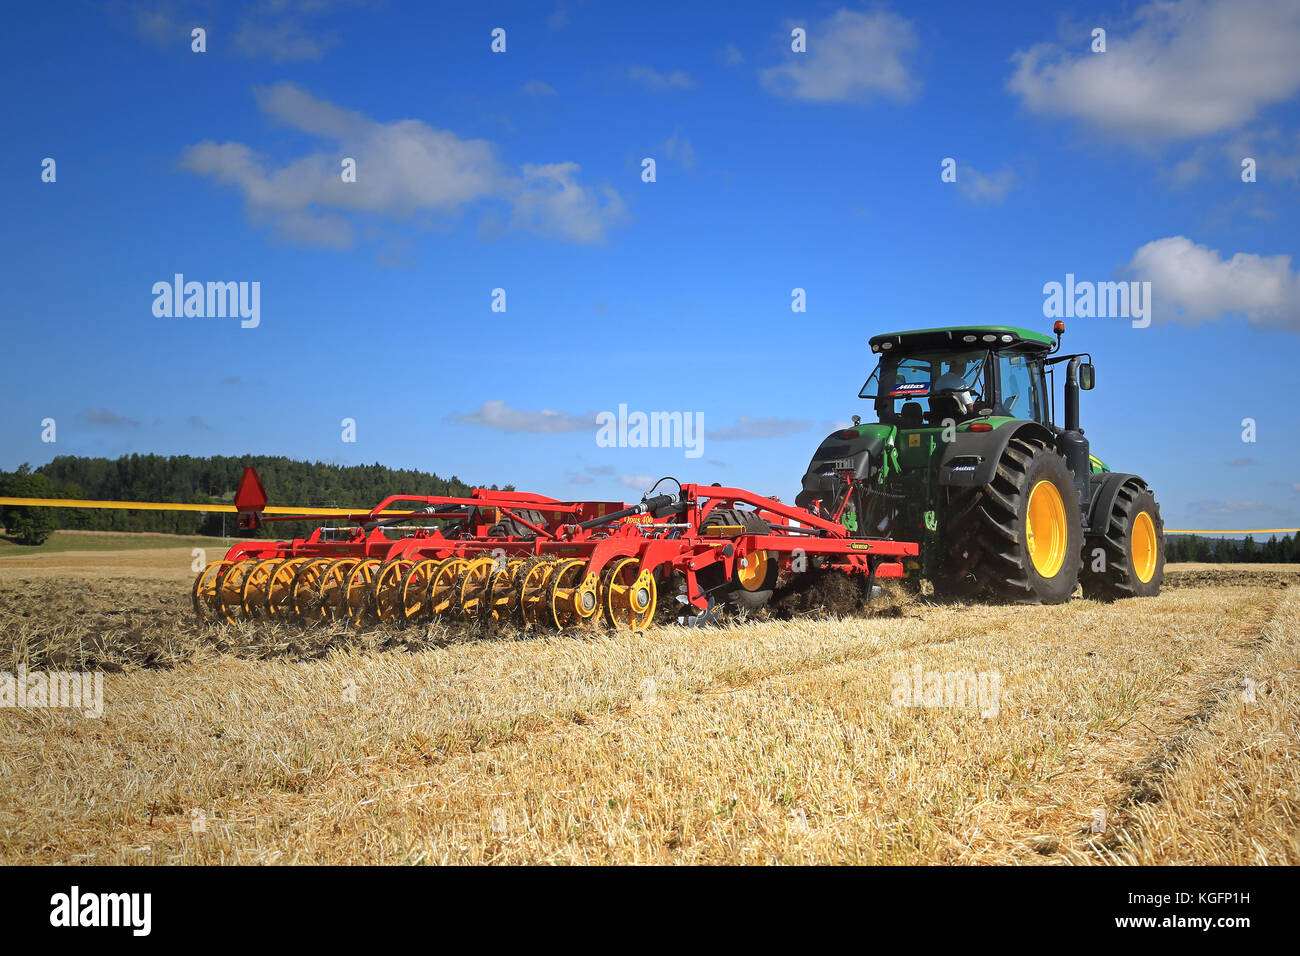 SALO, FINLAND - AUGUST 22, 2015: John Deere 8370R tractor and Vaderstad Opus 400 cultivator on field at Puontin Peltopaivat Agricultural Harvesting an Stock Photo